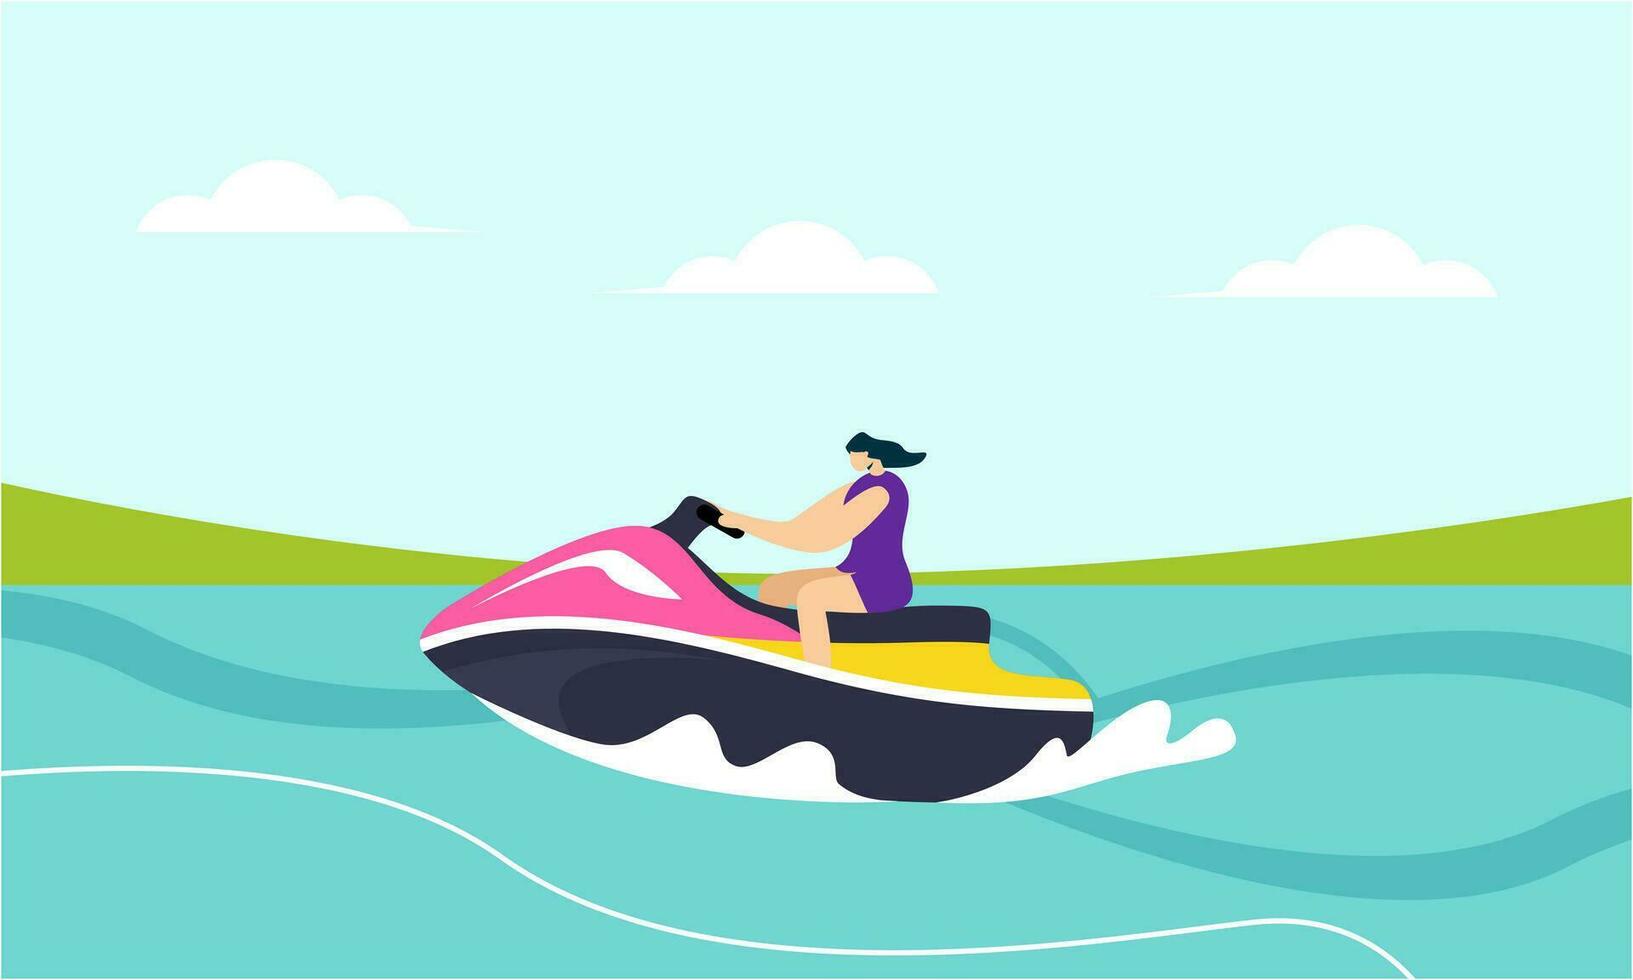 People young riding a jet ski vector illustration